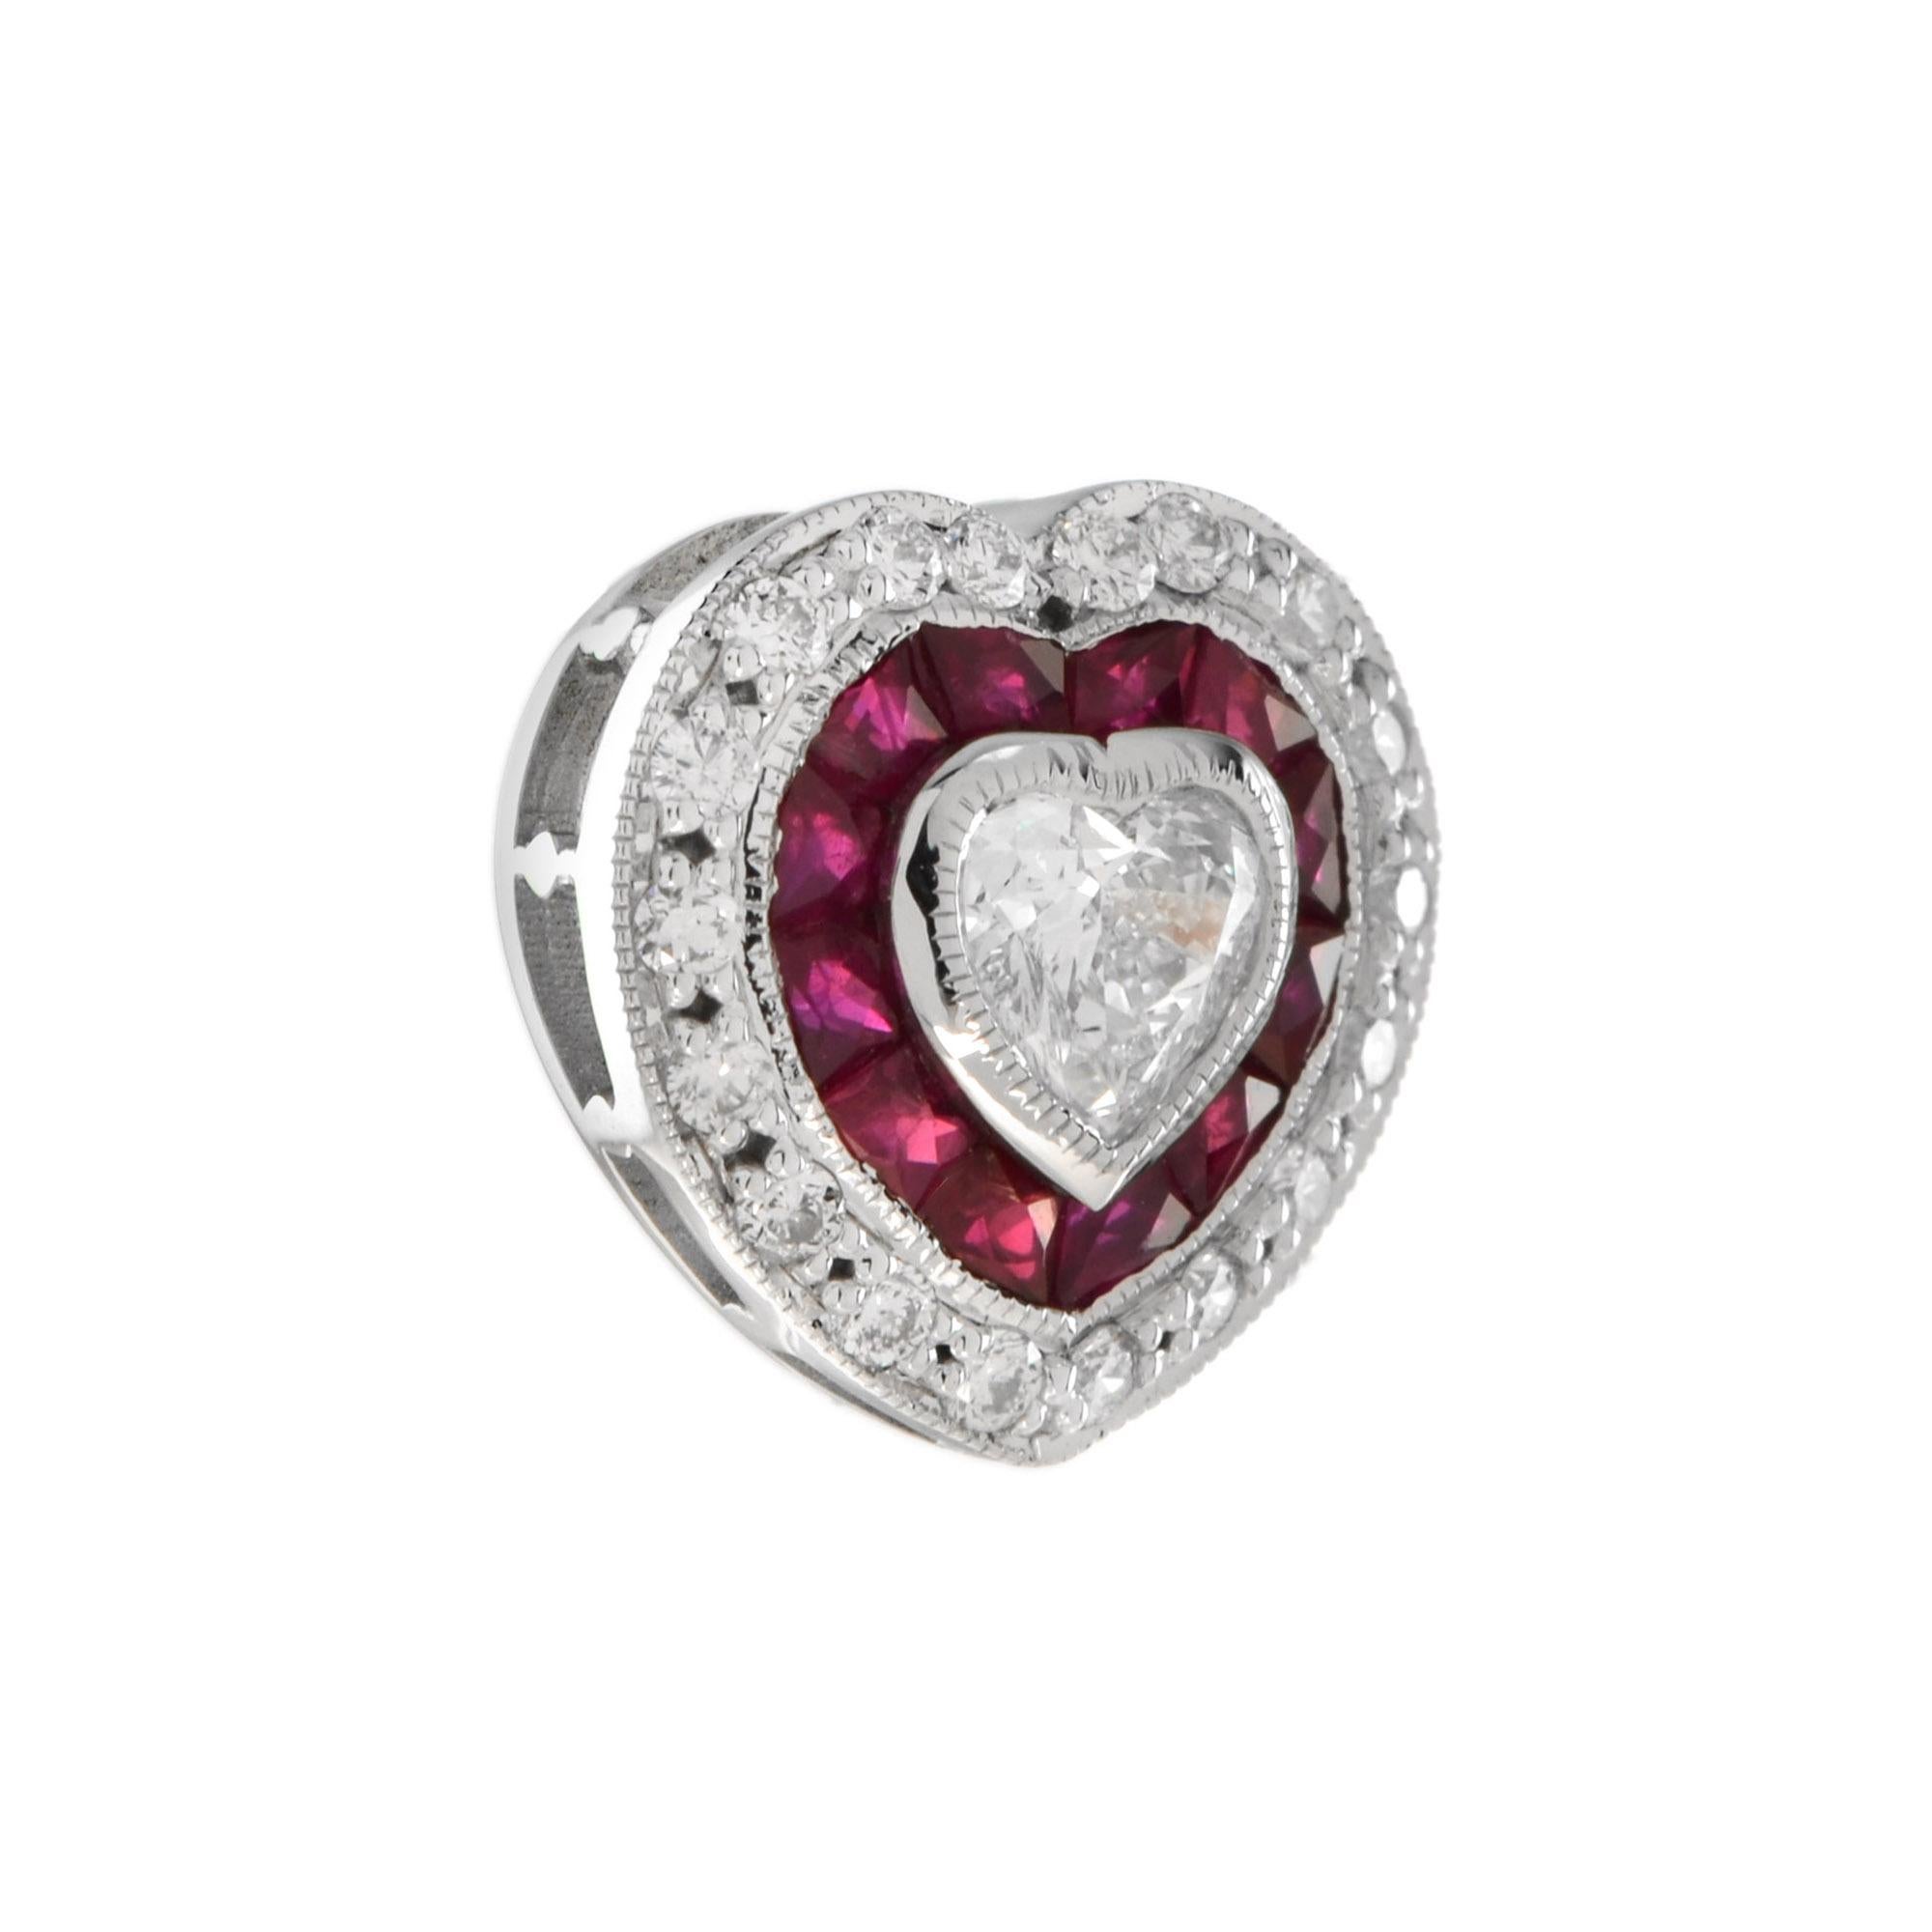 Crafted in 14k white gold, this lovely heart shaped pendant offer a beautiful combination of sophistication and charm. The center heart shaped diamonds weigh .25 carat and grade G color, VS clarity. A frame of French cut rubies, and additional .11